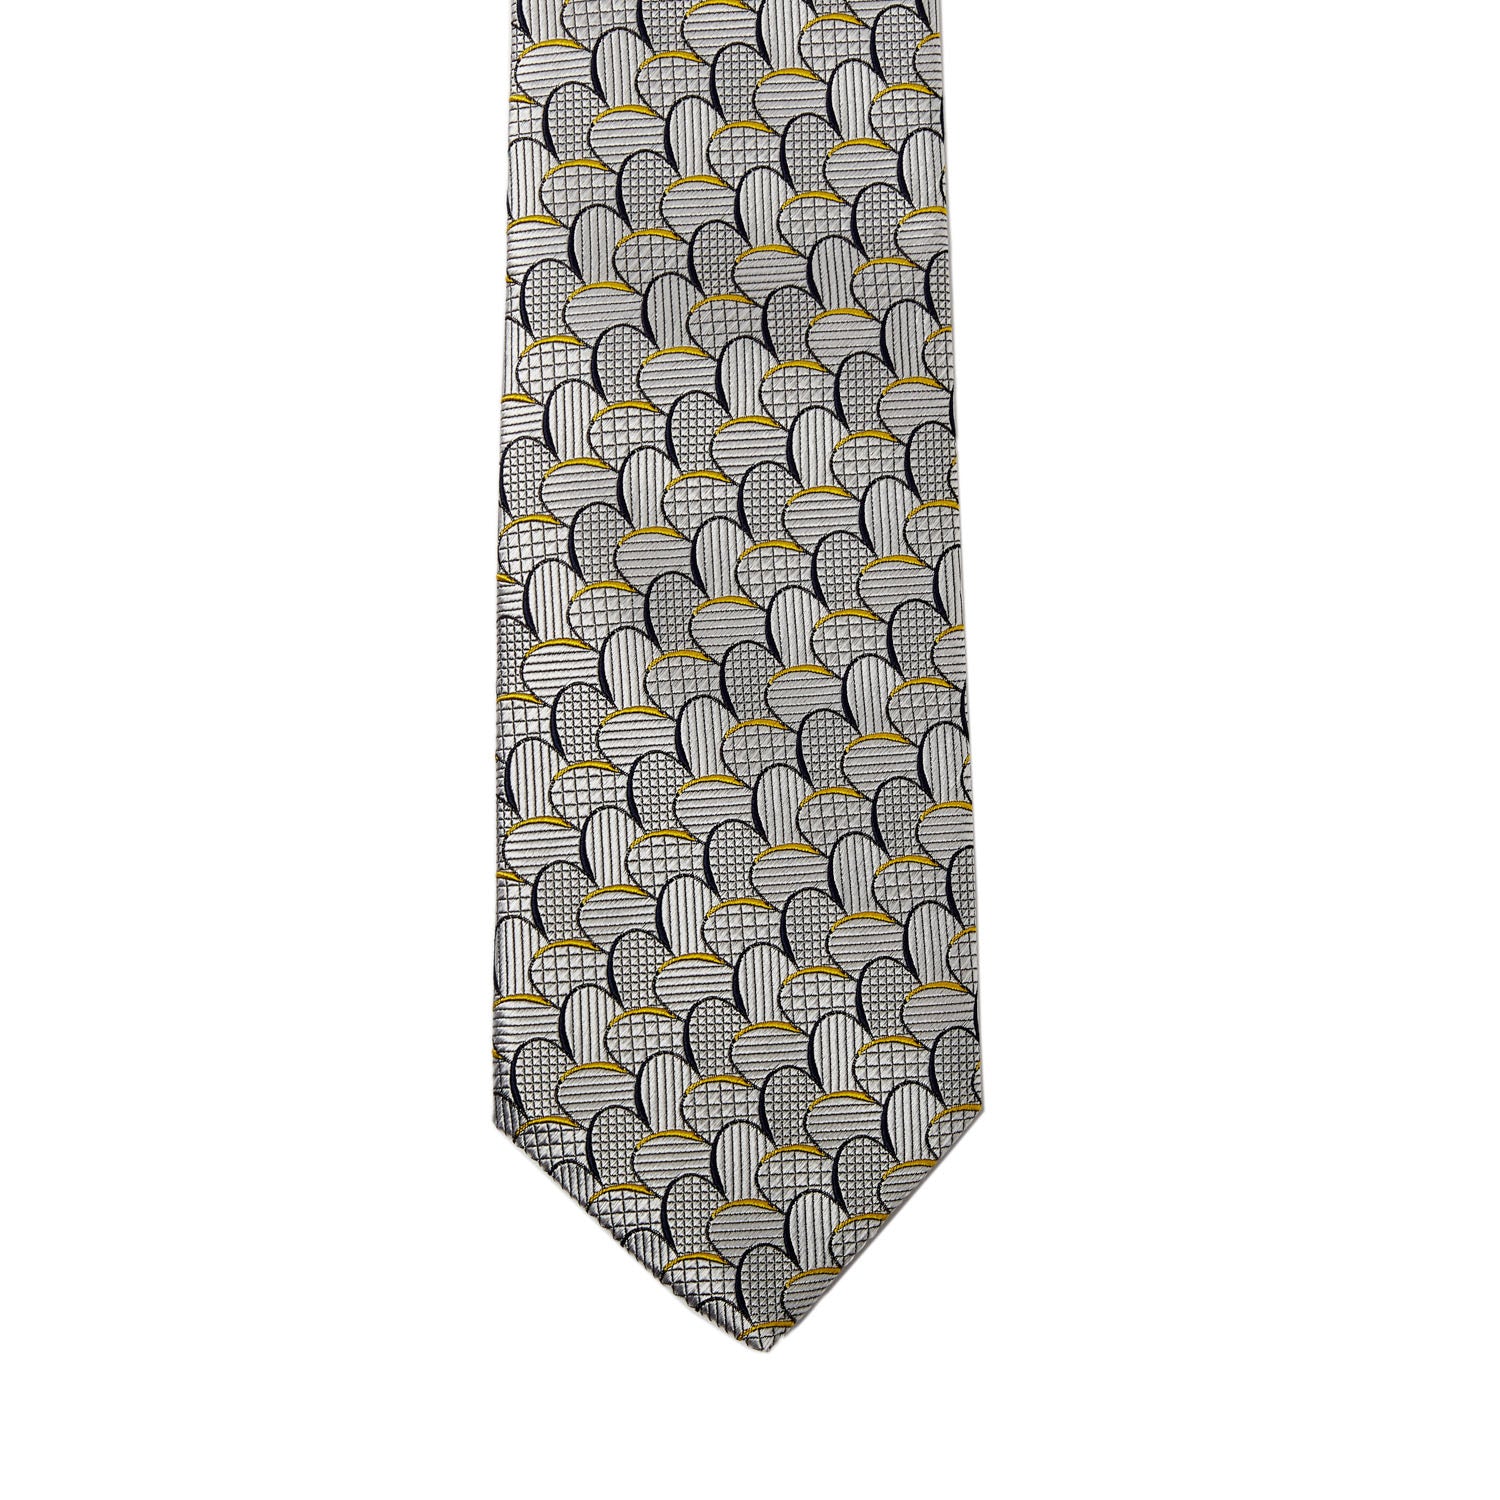 A handmade Sovereign Grade Sydney Jacquard Tie from KirbyAllison.com with circles on it, representing sovereign grade quality.